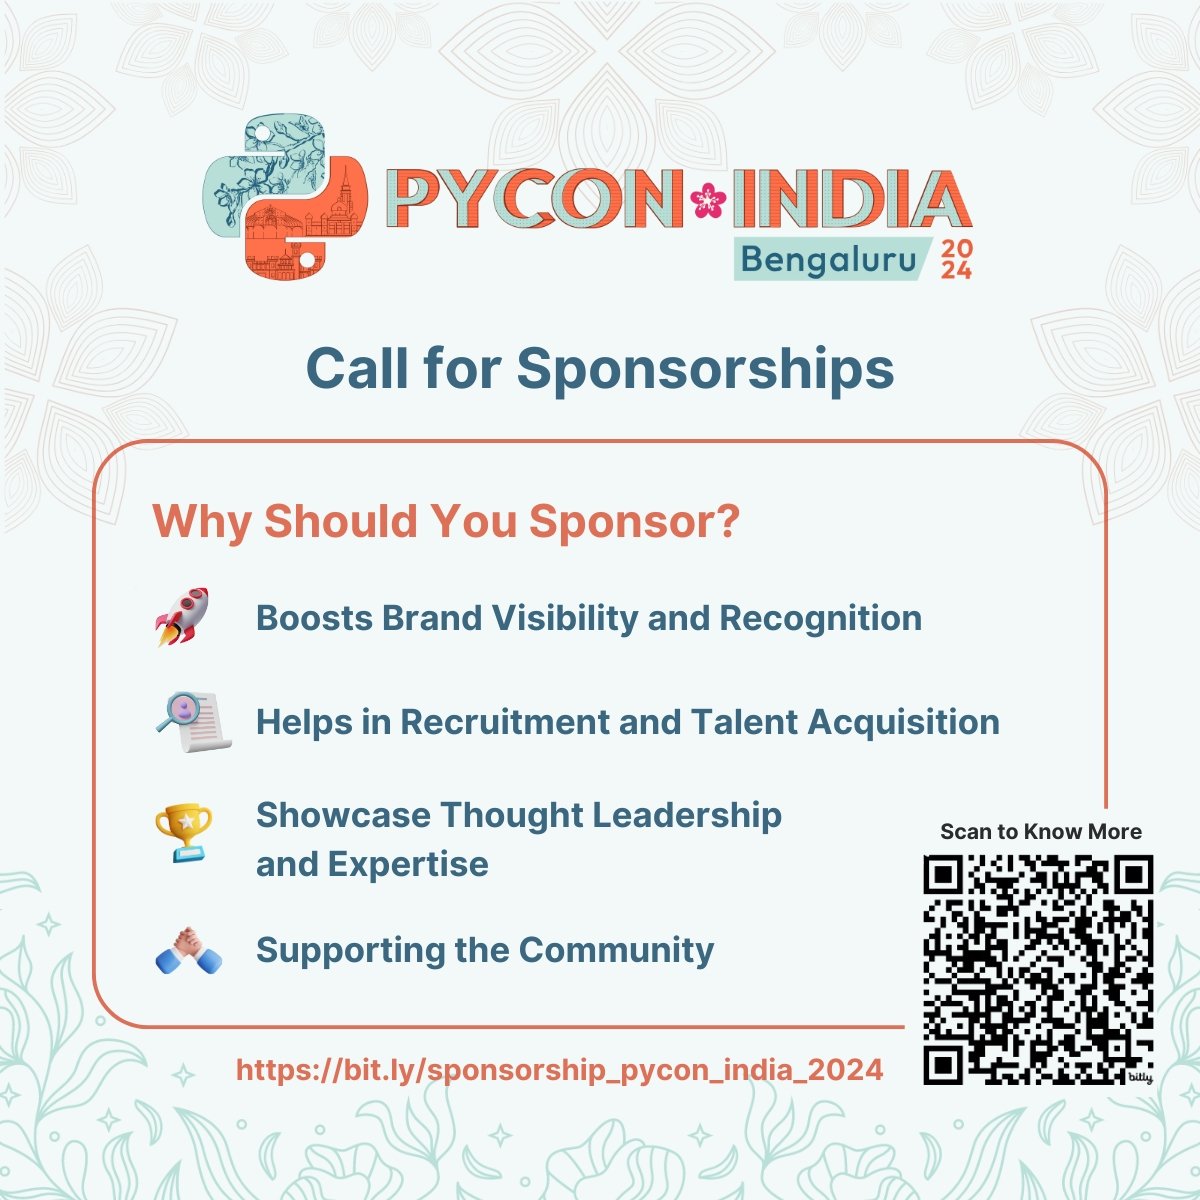 🚀 Interested in sponsoring PyCon India 2024? 

🐍 Let's collaborate! 

Register your interest here: bit.ly/sponsorship_py…

 #PyConIndia2024 #SponsorshipOpportunity #python